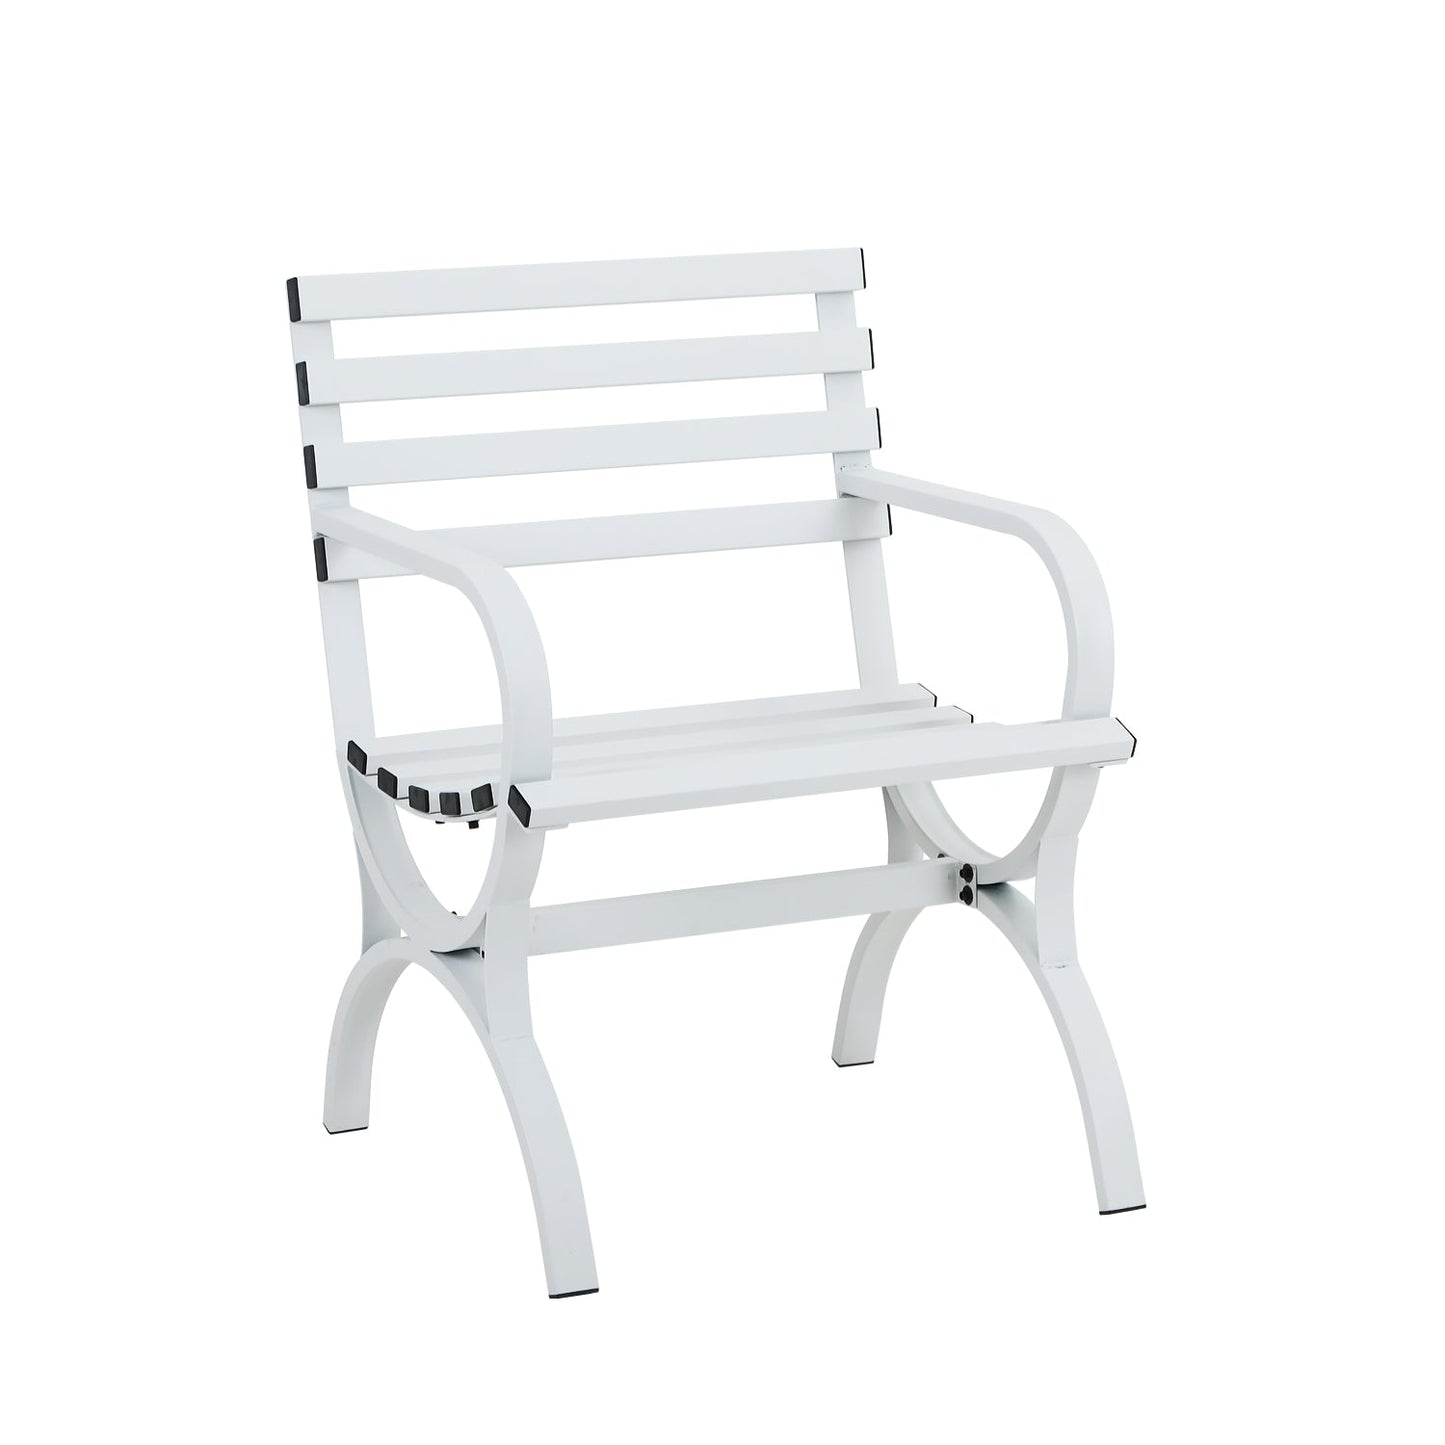 Sophia & William Single Seater Outdoor Metal Bench Chair in White